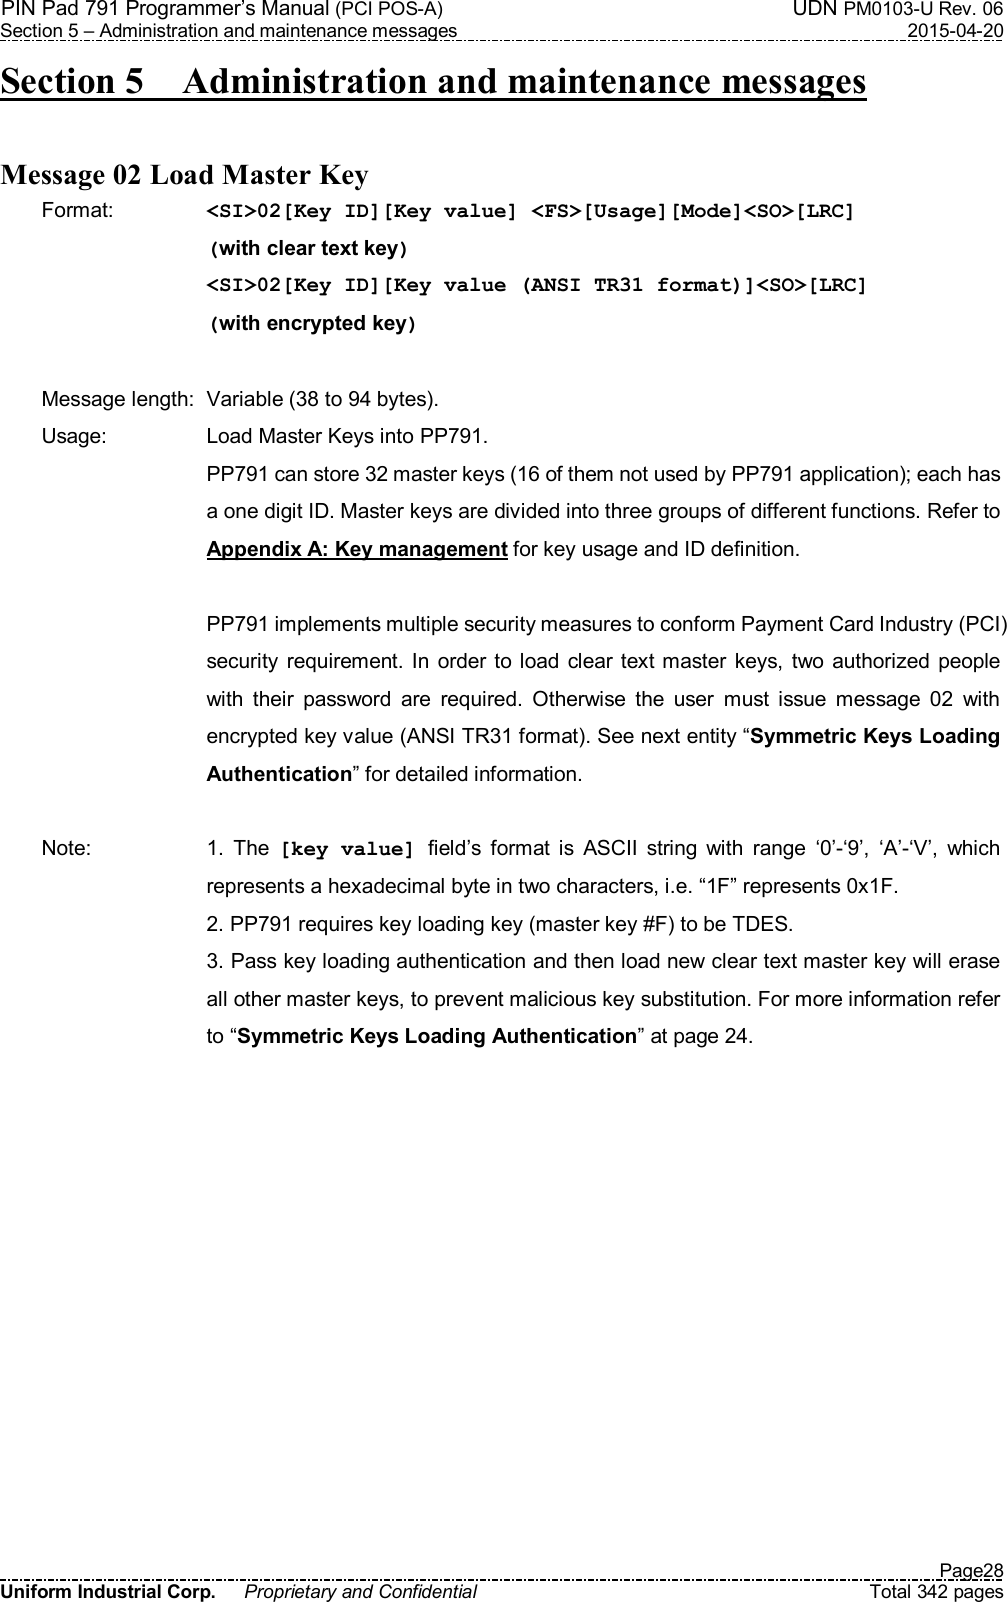 PIN Pad 791 Programmer’s Manual (PCI POS-A)  UDN PM0103-U Rev. 06 Section 5 – Administration and maintenance messages  2015-04-20   Page28 Uniform Industrial Corp.  Proprietary and Confidential  Total 342 pages Section 5    Administration and maintenance messages    Message 02 Load Master Key   Format:    &lt;SI&gt;02[Key ID][Key value] &lt;FS&gt;[Usage][Mode]&lt;SO&gt;[LRC]  (with clear text key) &lt;SI&gt;02[Key ID][Key value (ANSI TR31 format)]&lt;SO&gt;[LRC]  (with encrypted key)  Message length:  Variable (38 to 94 bytes). Usage:  Load Master Keys into PP791. PP791 can store 32 master keys (16 of them not used by PP791 application); each has a one digit ID. Master keys are divided into three groups of different functions. Refer to Appendix A: Key management for key usage and ID definition.    PP791 implements multiple security measures to conform Payment Card Industry (PCI) security  requirement.  In  order  to load clear text master keys, two  authorized people with  their  password  are  required.  Otherwise  the  user  must  issue  message  02  with encrypted key value (ANSI TR31 format). See next entity “Symmetric Keys Loading Authentication” for detailed information.  Note:  1.  The  [key value] field’s  format  is  ASCII  string  with  range  ‘0’-‘9’,  ‘A’-‘V’,  which represents a hexadecimal byte in two characters, i.e. “1F” represents 0x1F. 2. PP791 requires key loading key (master key #F) to be TDES. 3. Pass key loading authentication and then load new clear text master key will erase all other master keys, to prevent malicious key substitution. For more information refer to “Symmetric Keys Loading Authentication” at page 24. 